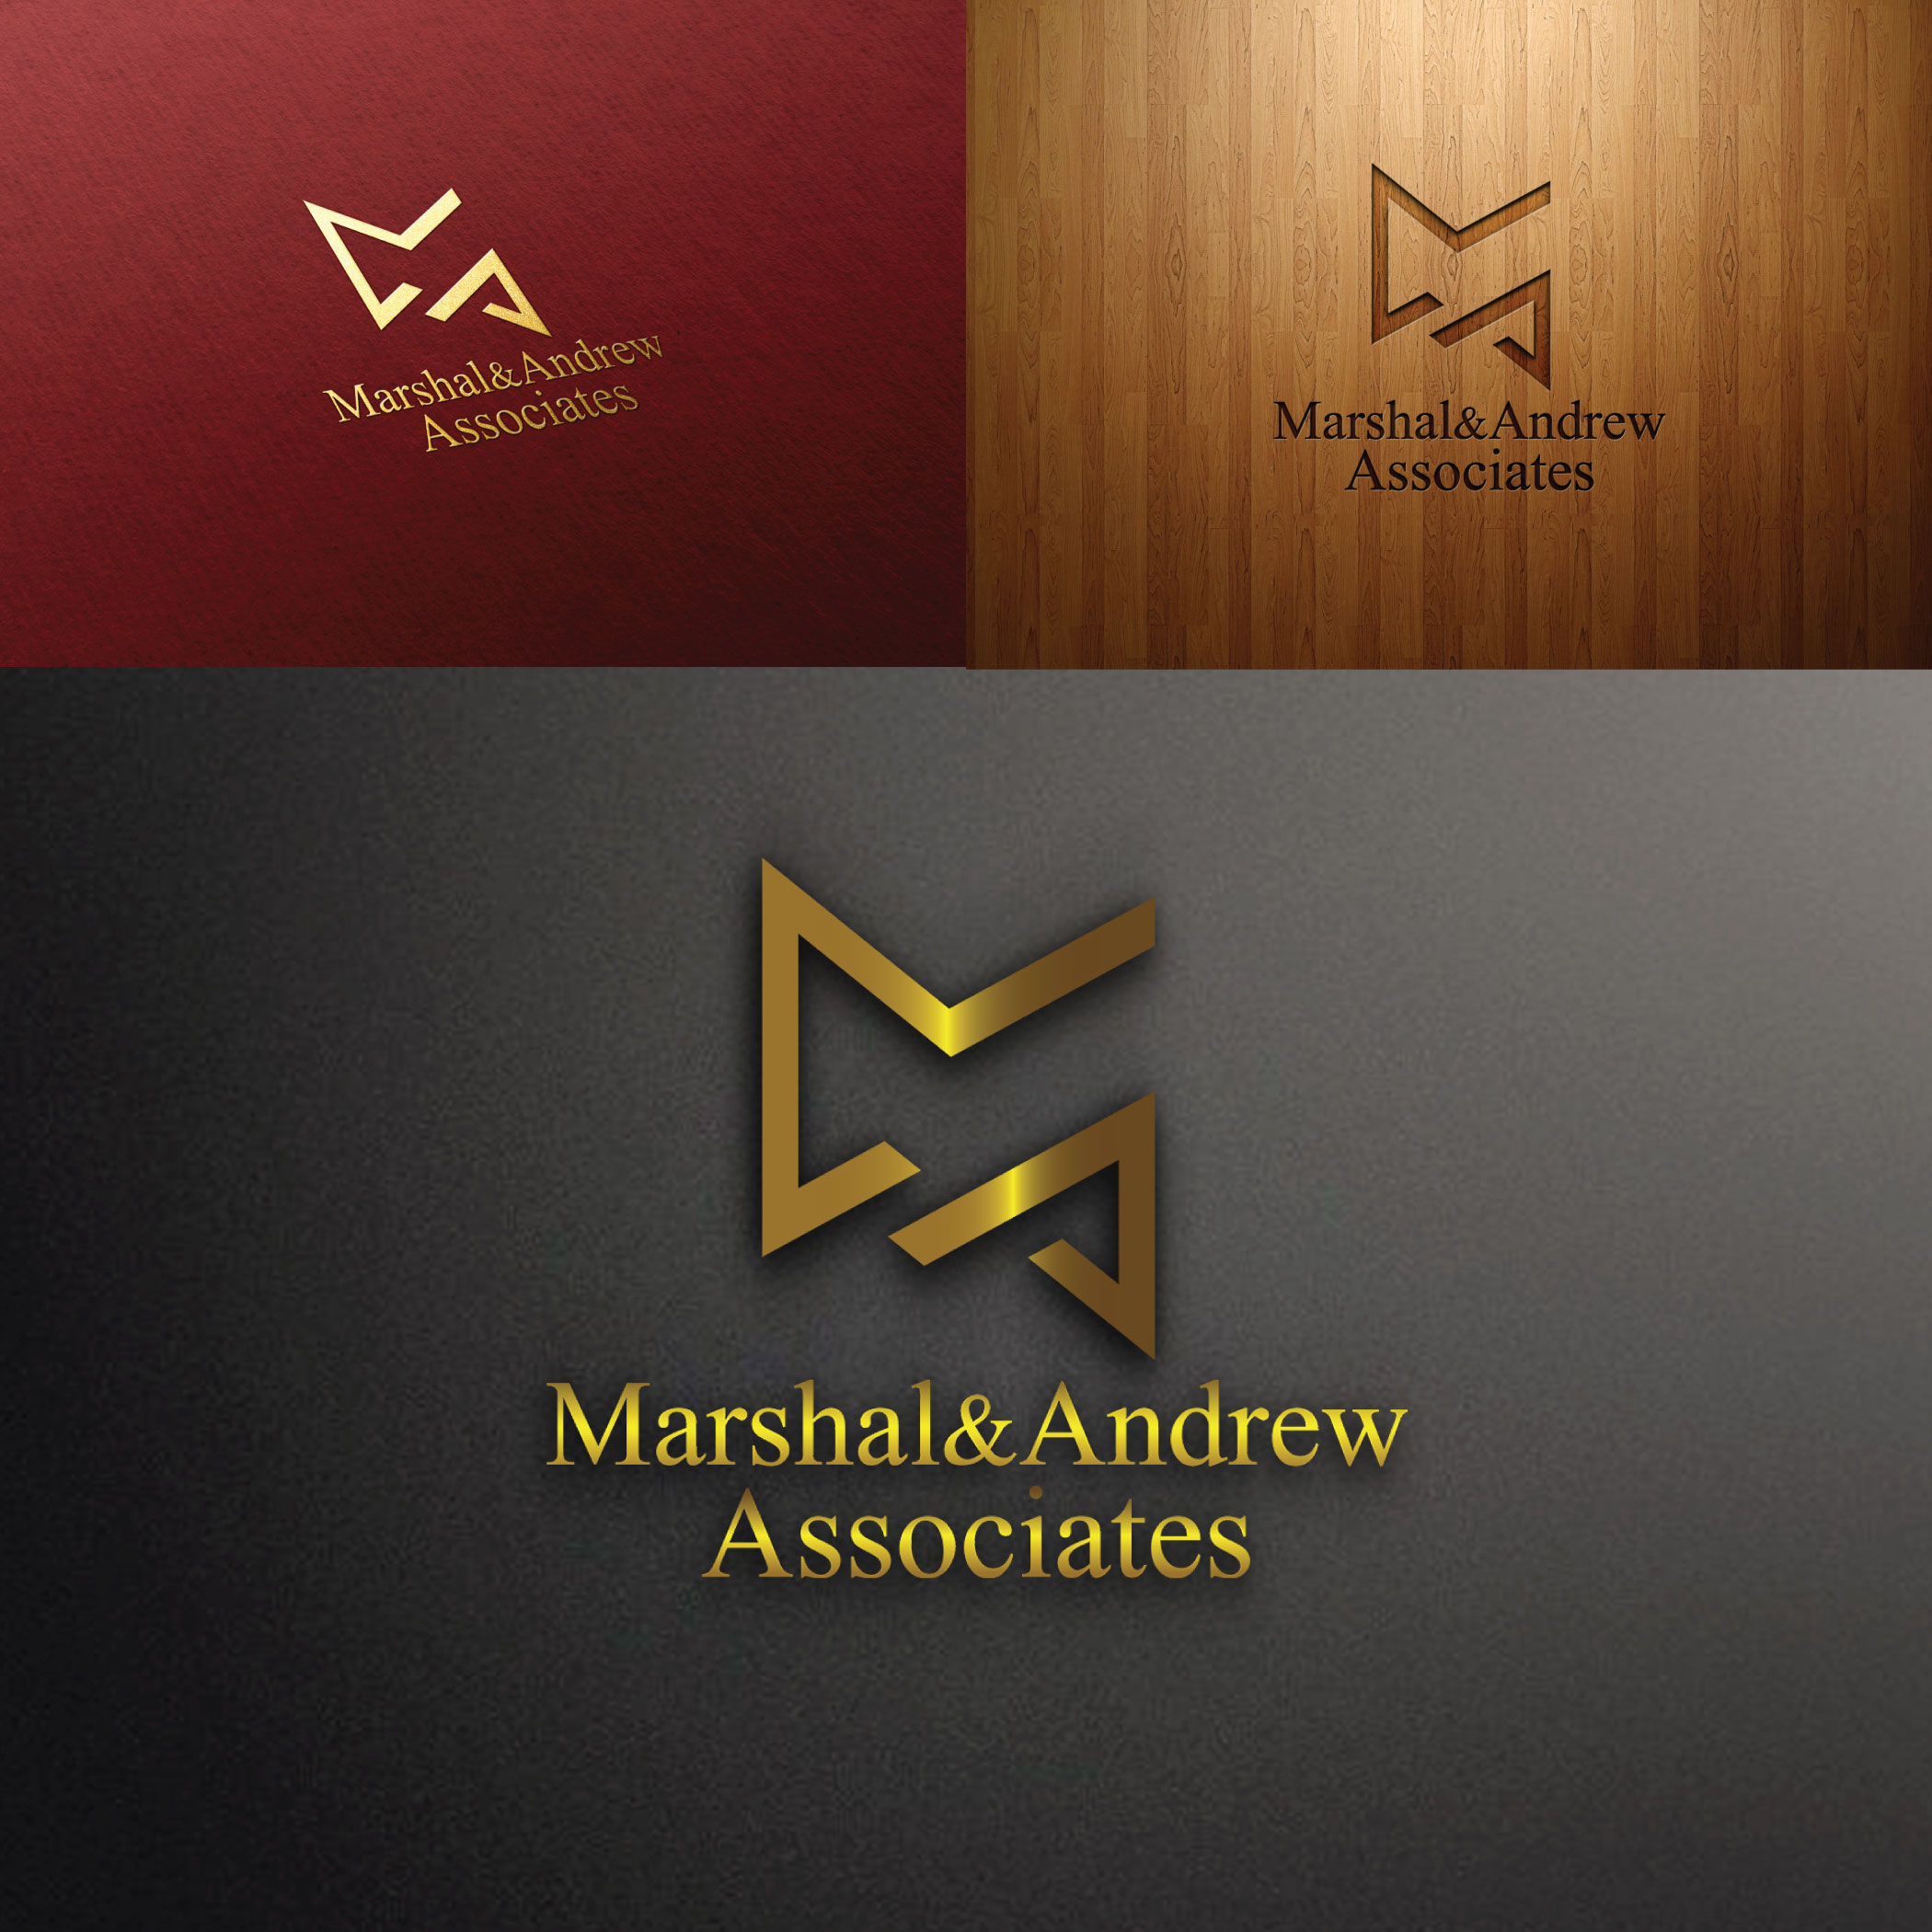 MA real estate logo (marshal and andrew associate) preview image.